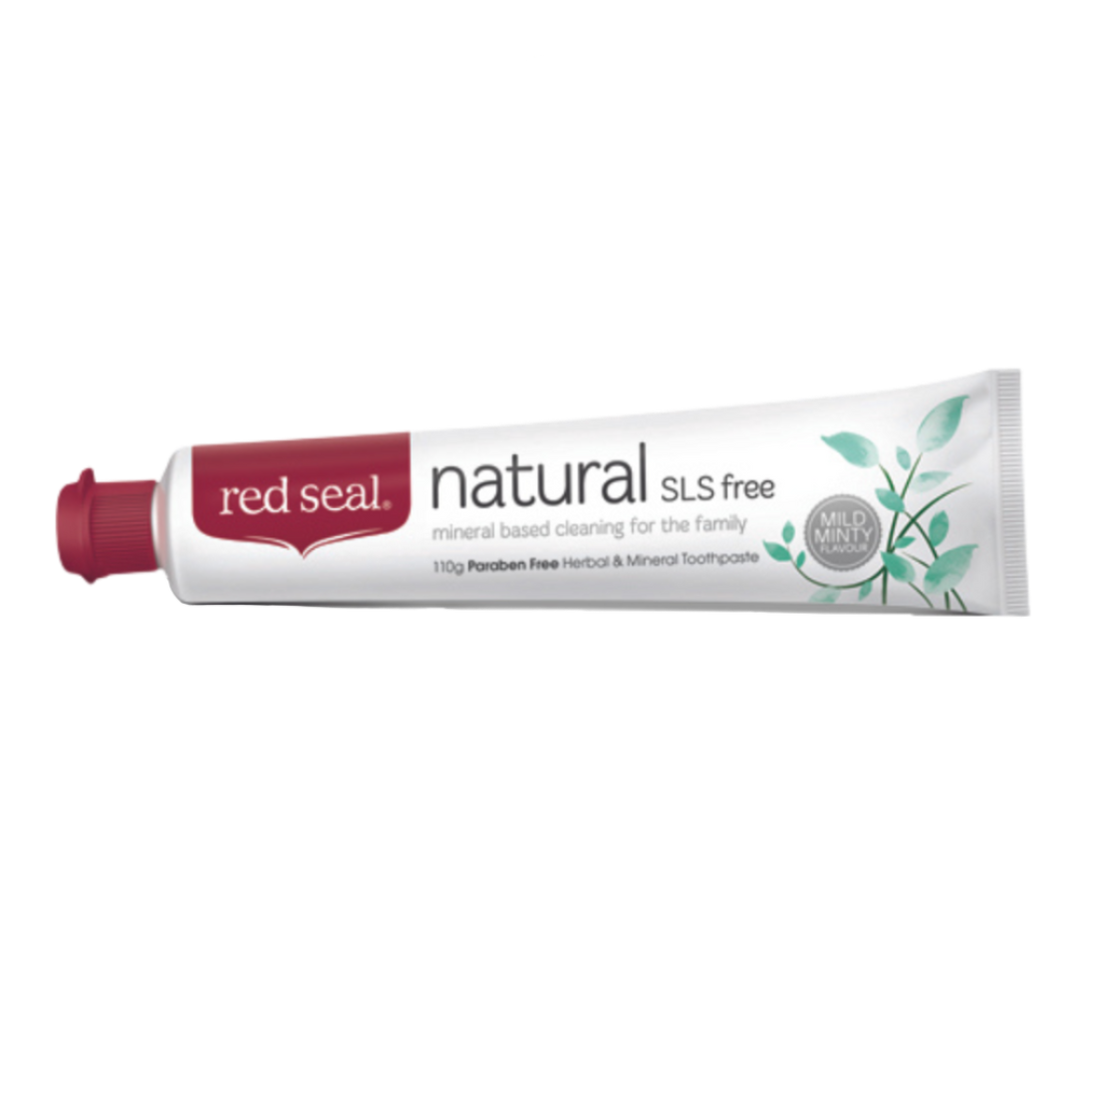 Red Seal Natural Toothpaste Natural SLS Free 100g